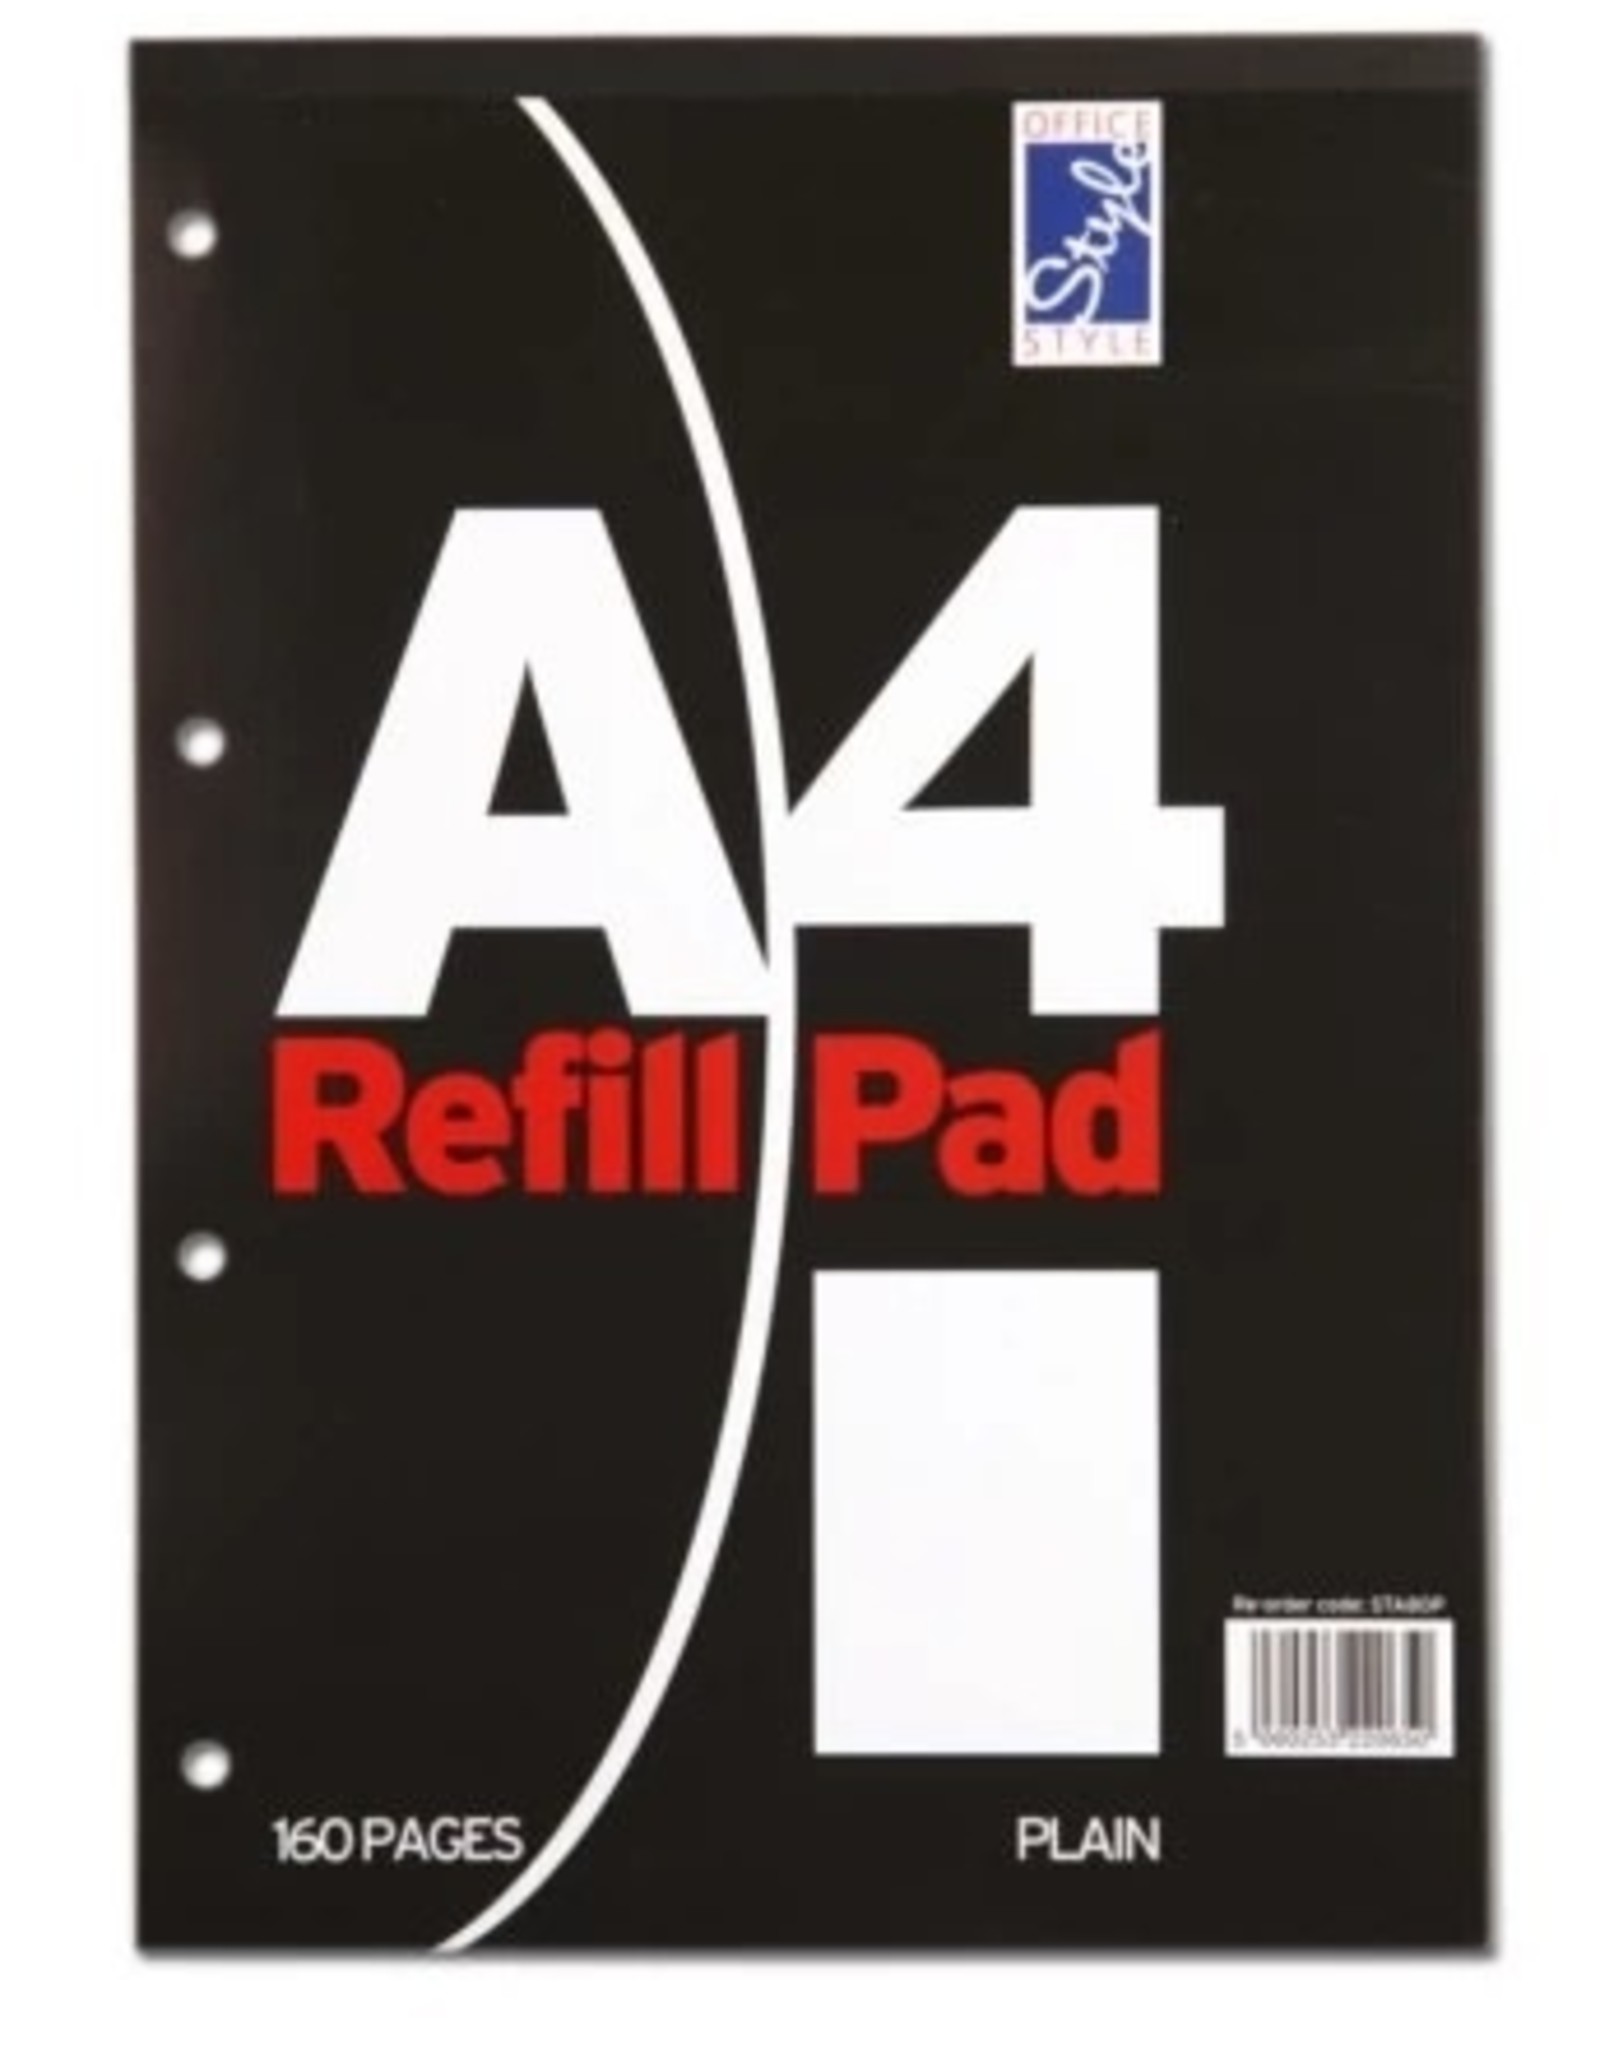 *SILVINE IMPACT A4 REFILL PAD 160 PAGES PLAIN ( BLACK COVER